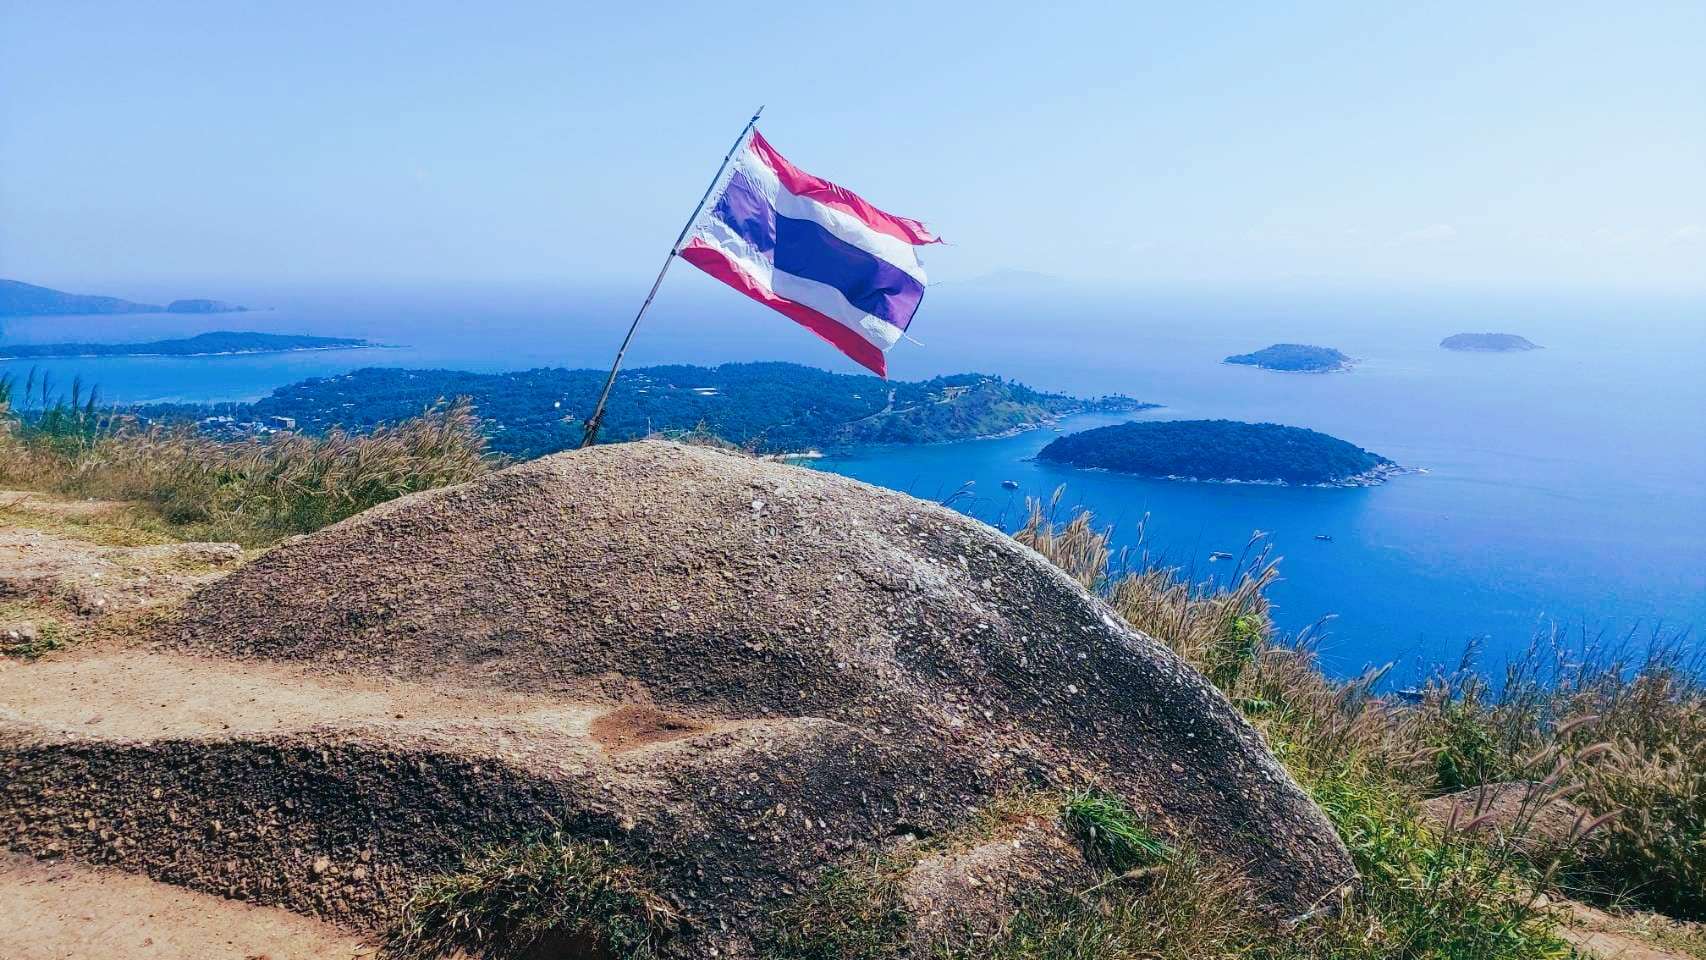 5 Lookouts to Find the Best View in Phuket